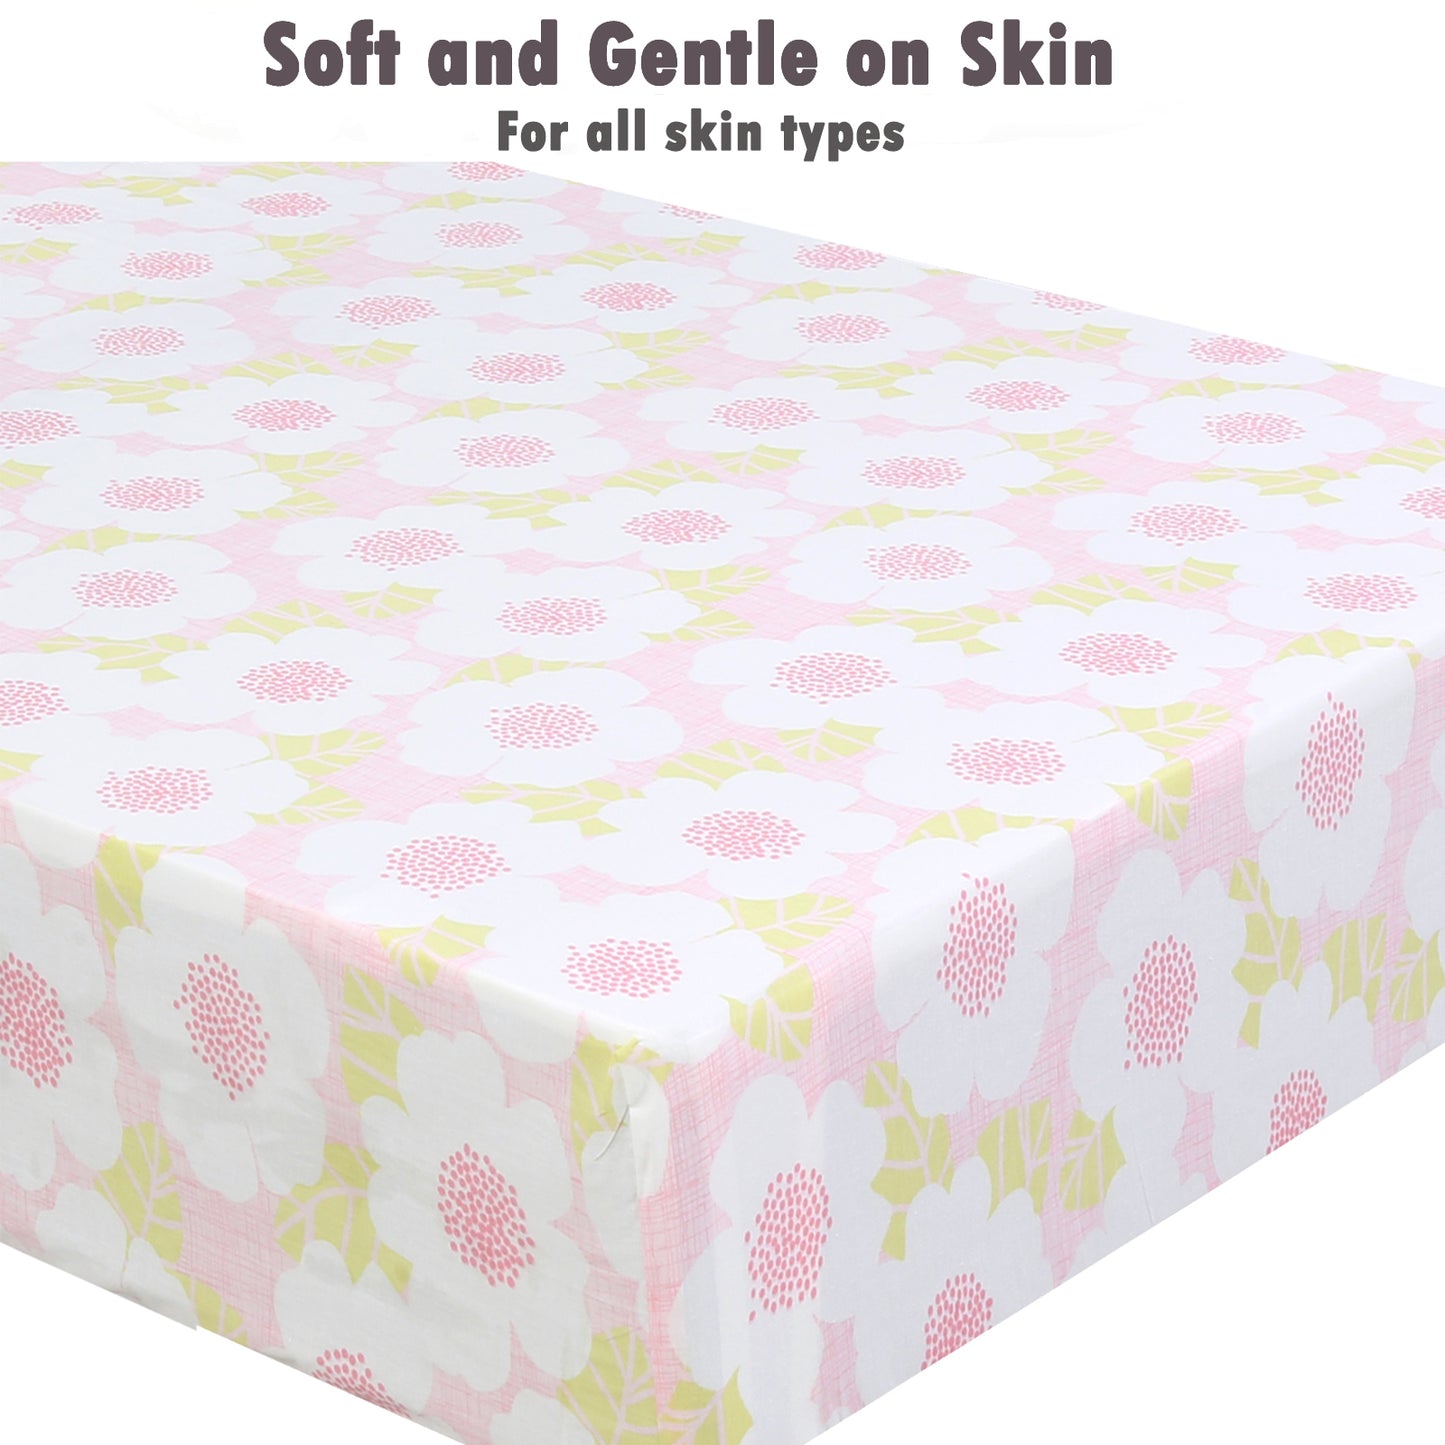 3 Piece Crib/Toddler Cotton Fitted Sheets Pink Purple Poppy Floral Damask Giraffes